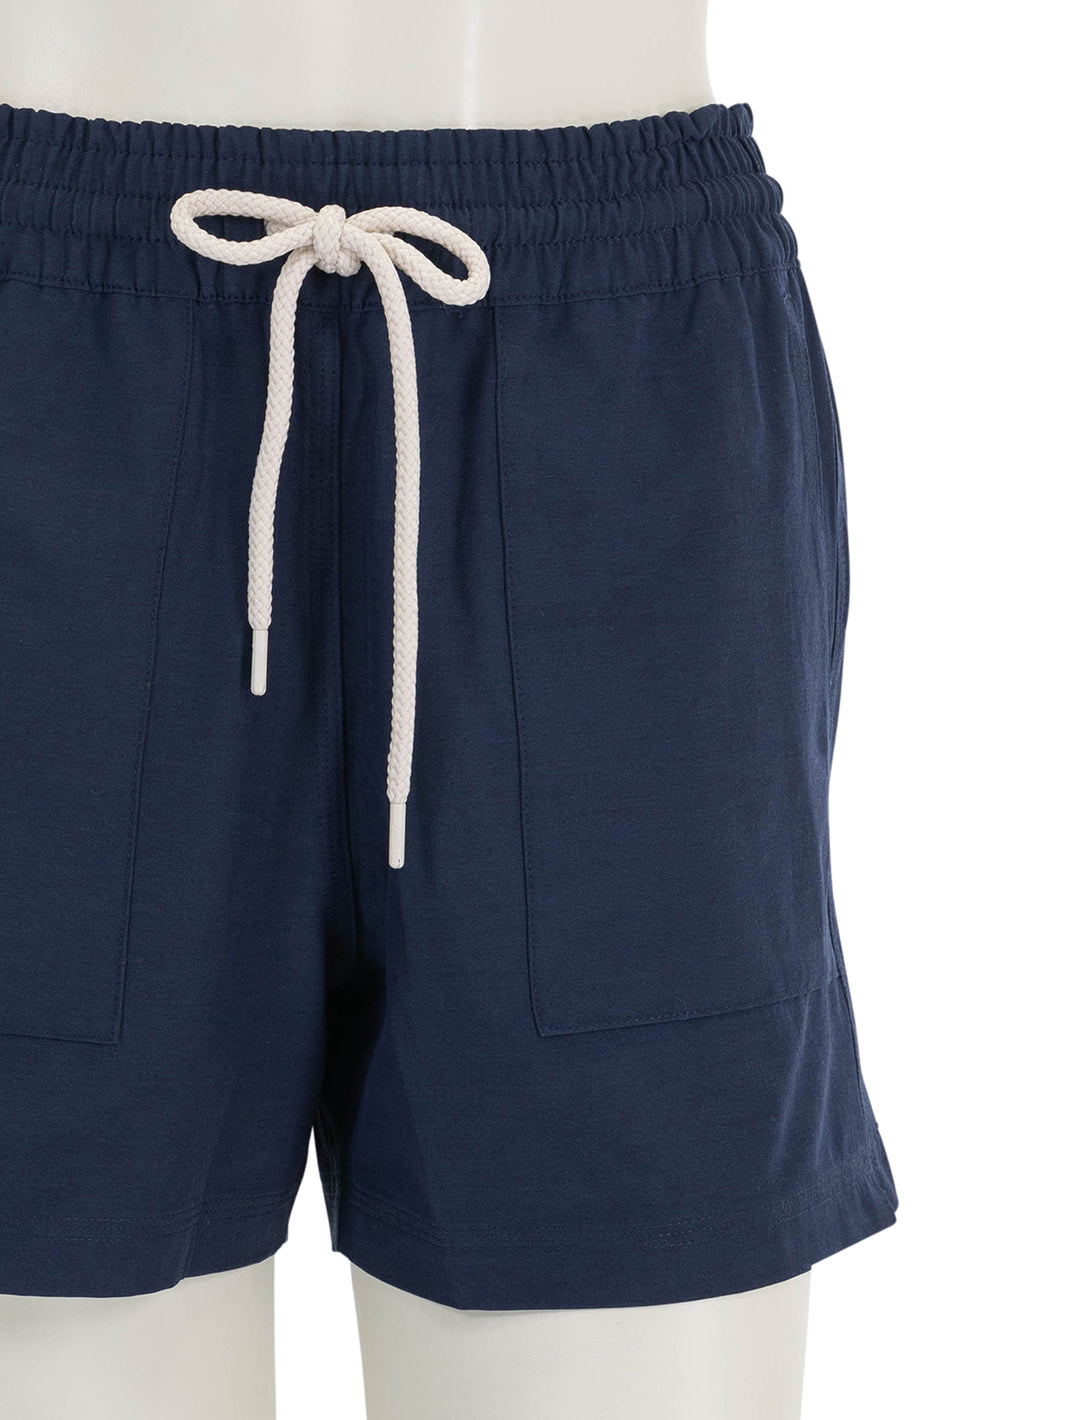 Close-up view of Faherty's all day short in navy blazer.